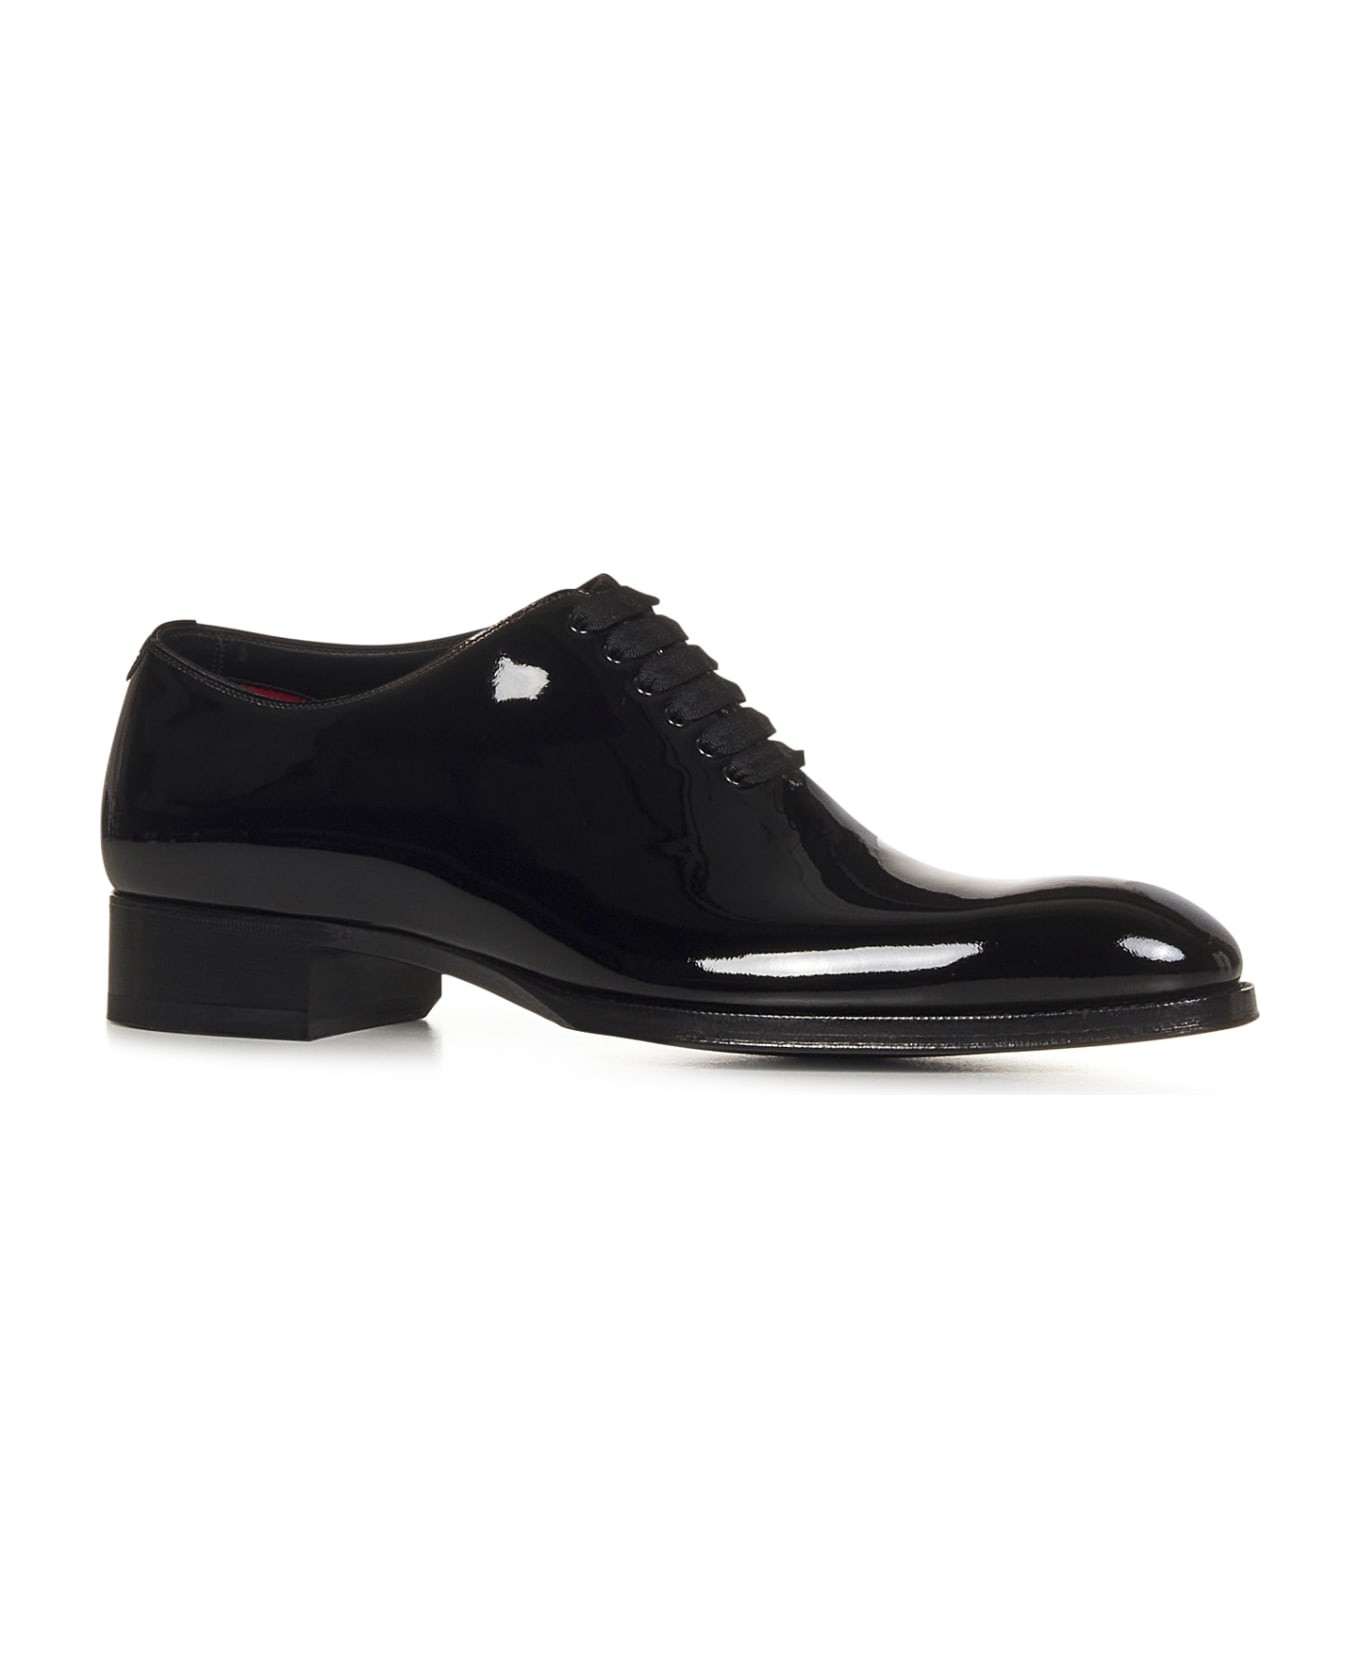 Tom Ford 'evening' Lace Up Shoes - Black